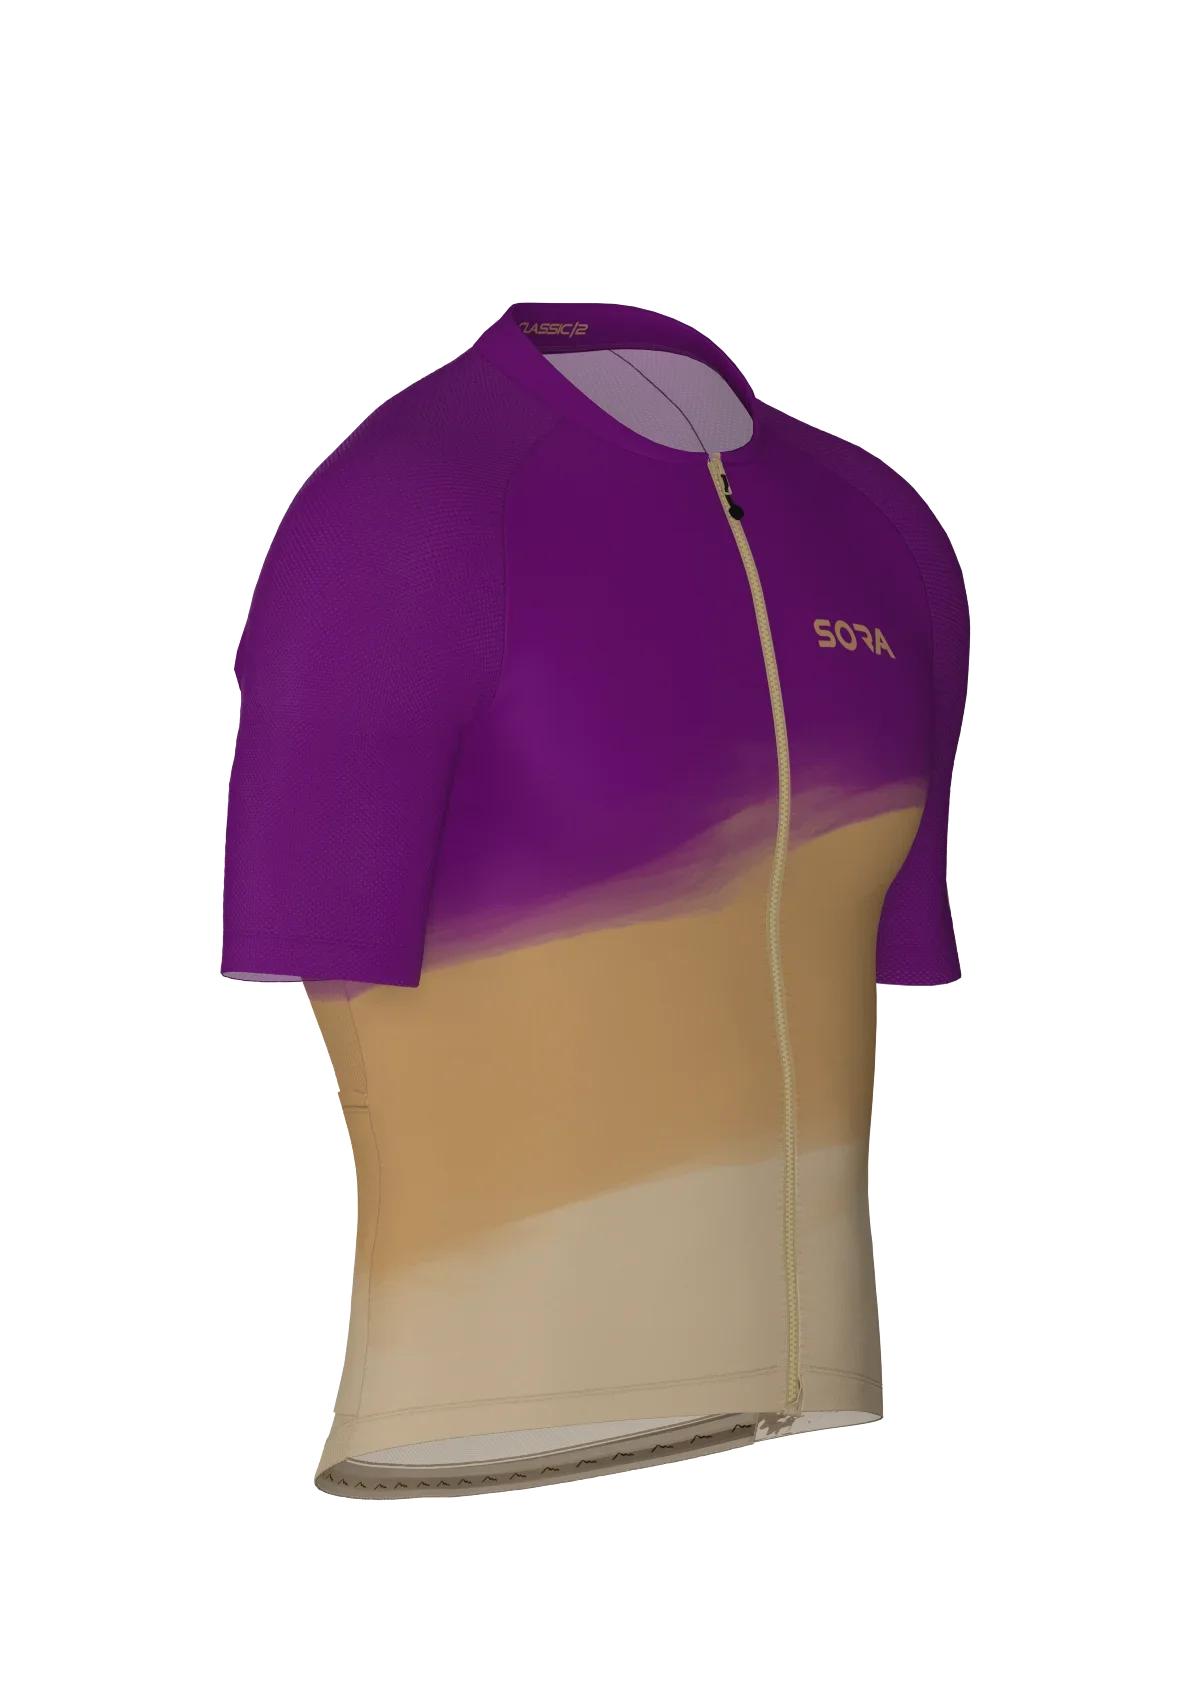 Classic violet-cream cycling jersey